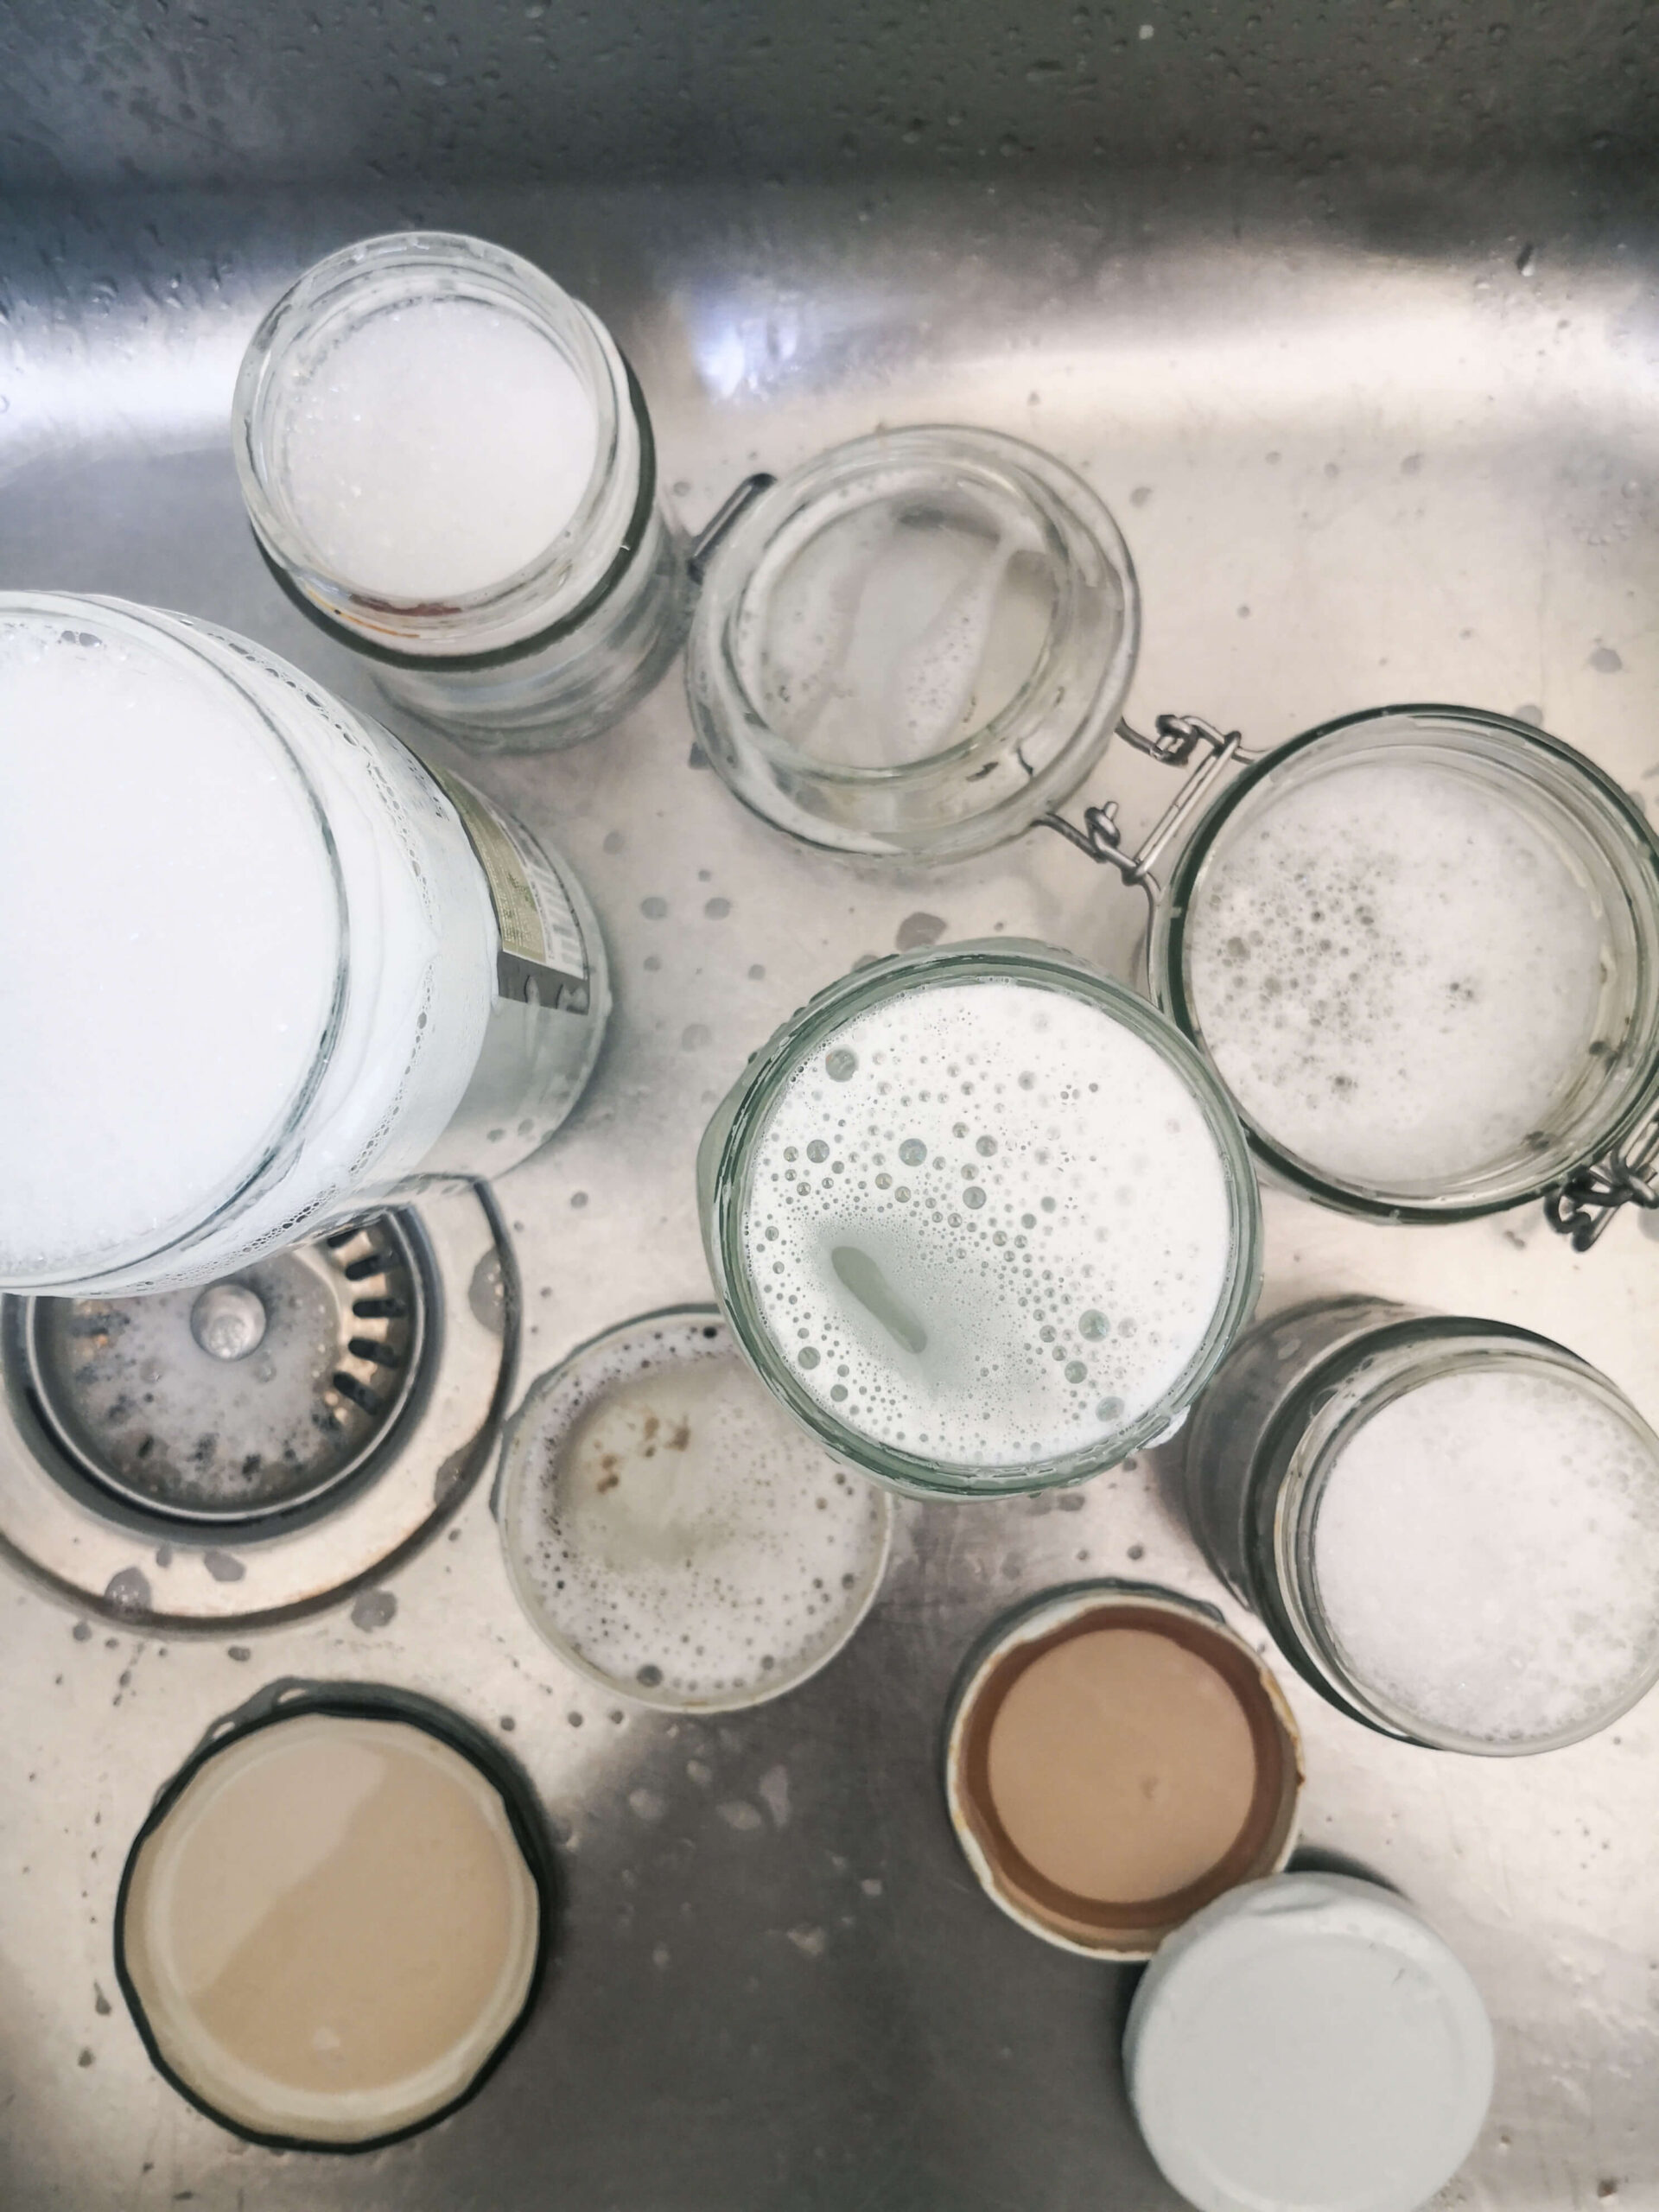 Glass jars washed in soapy water in the sink.